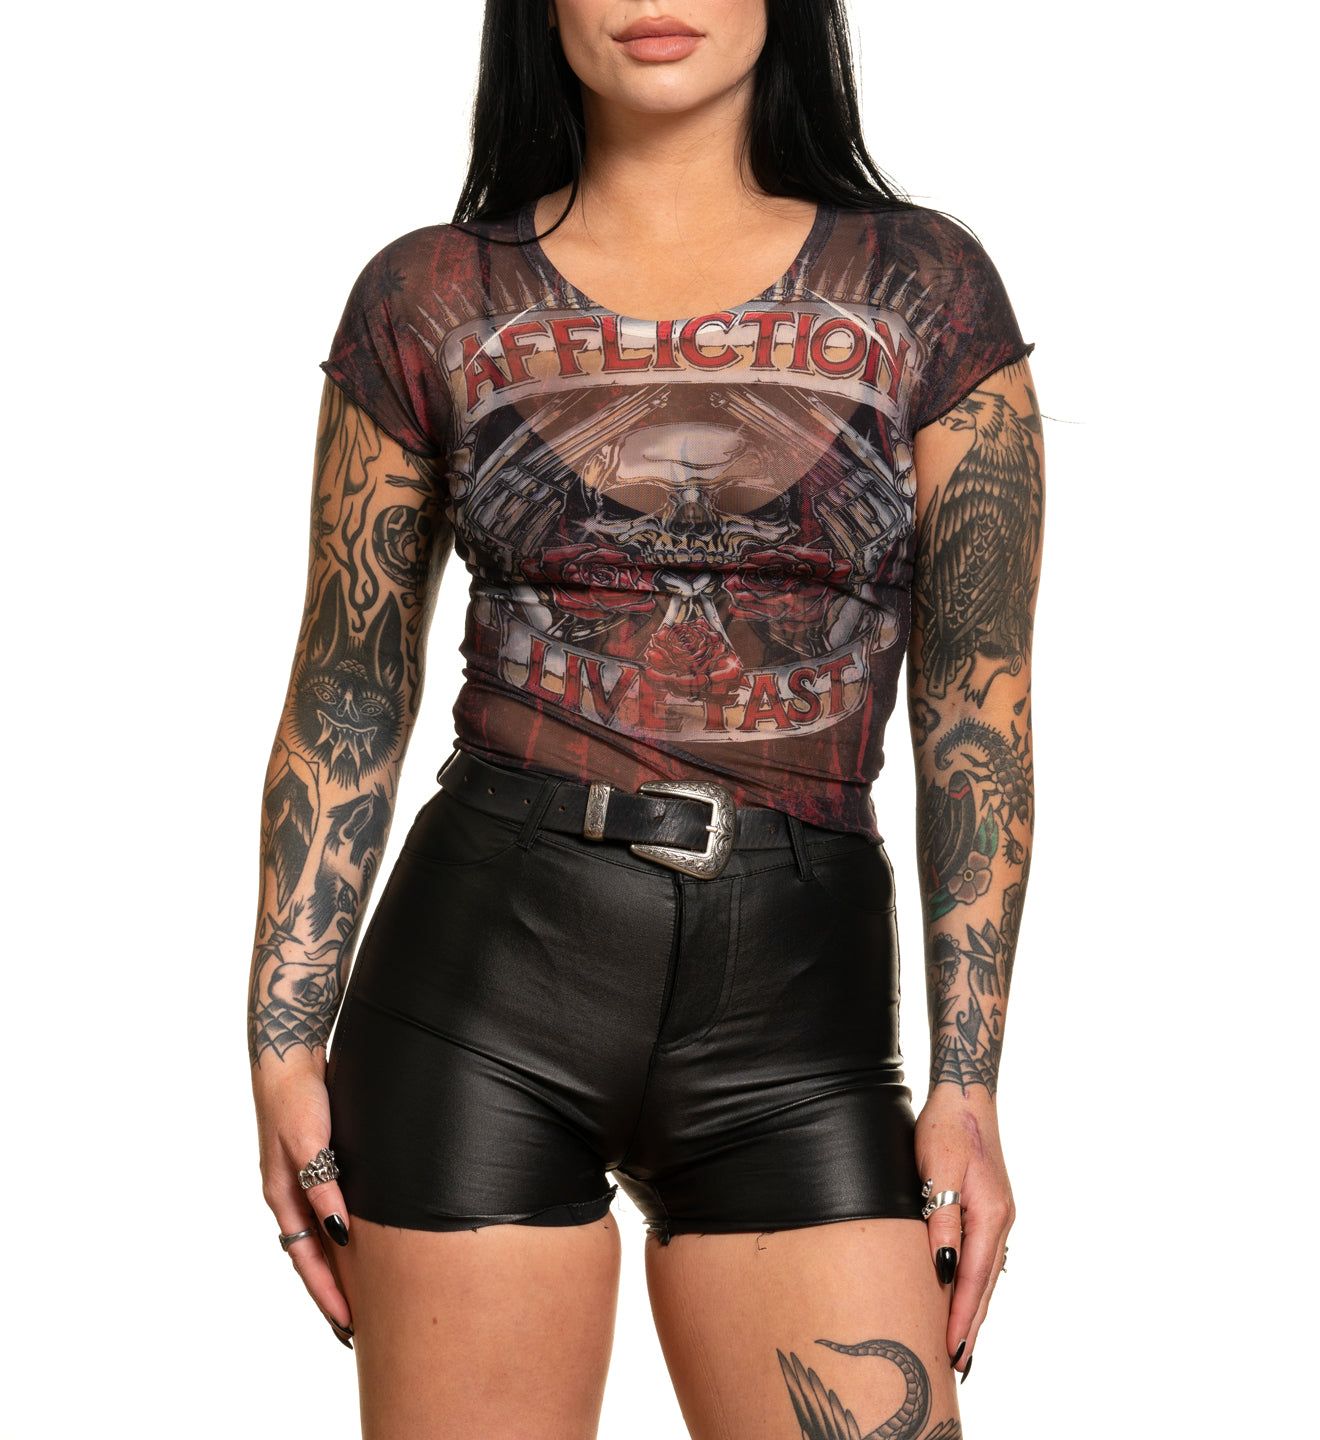 Hollow Point - Affliction Clothing